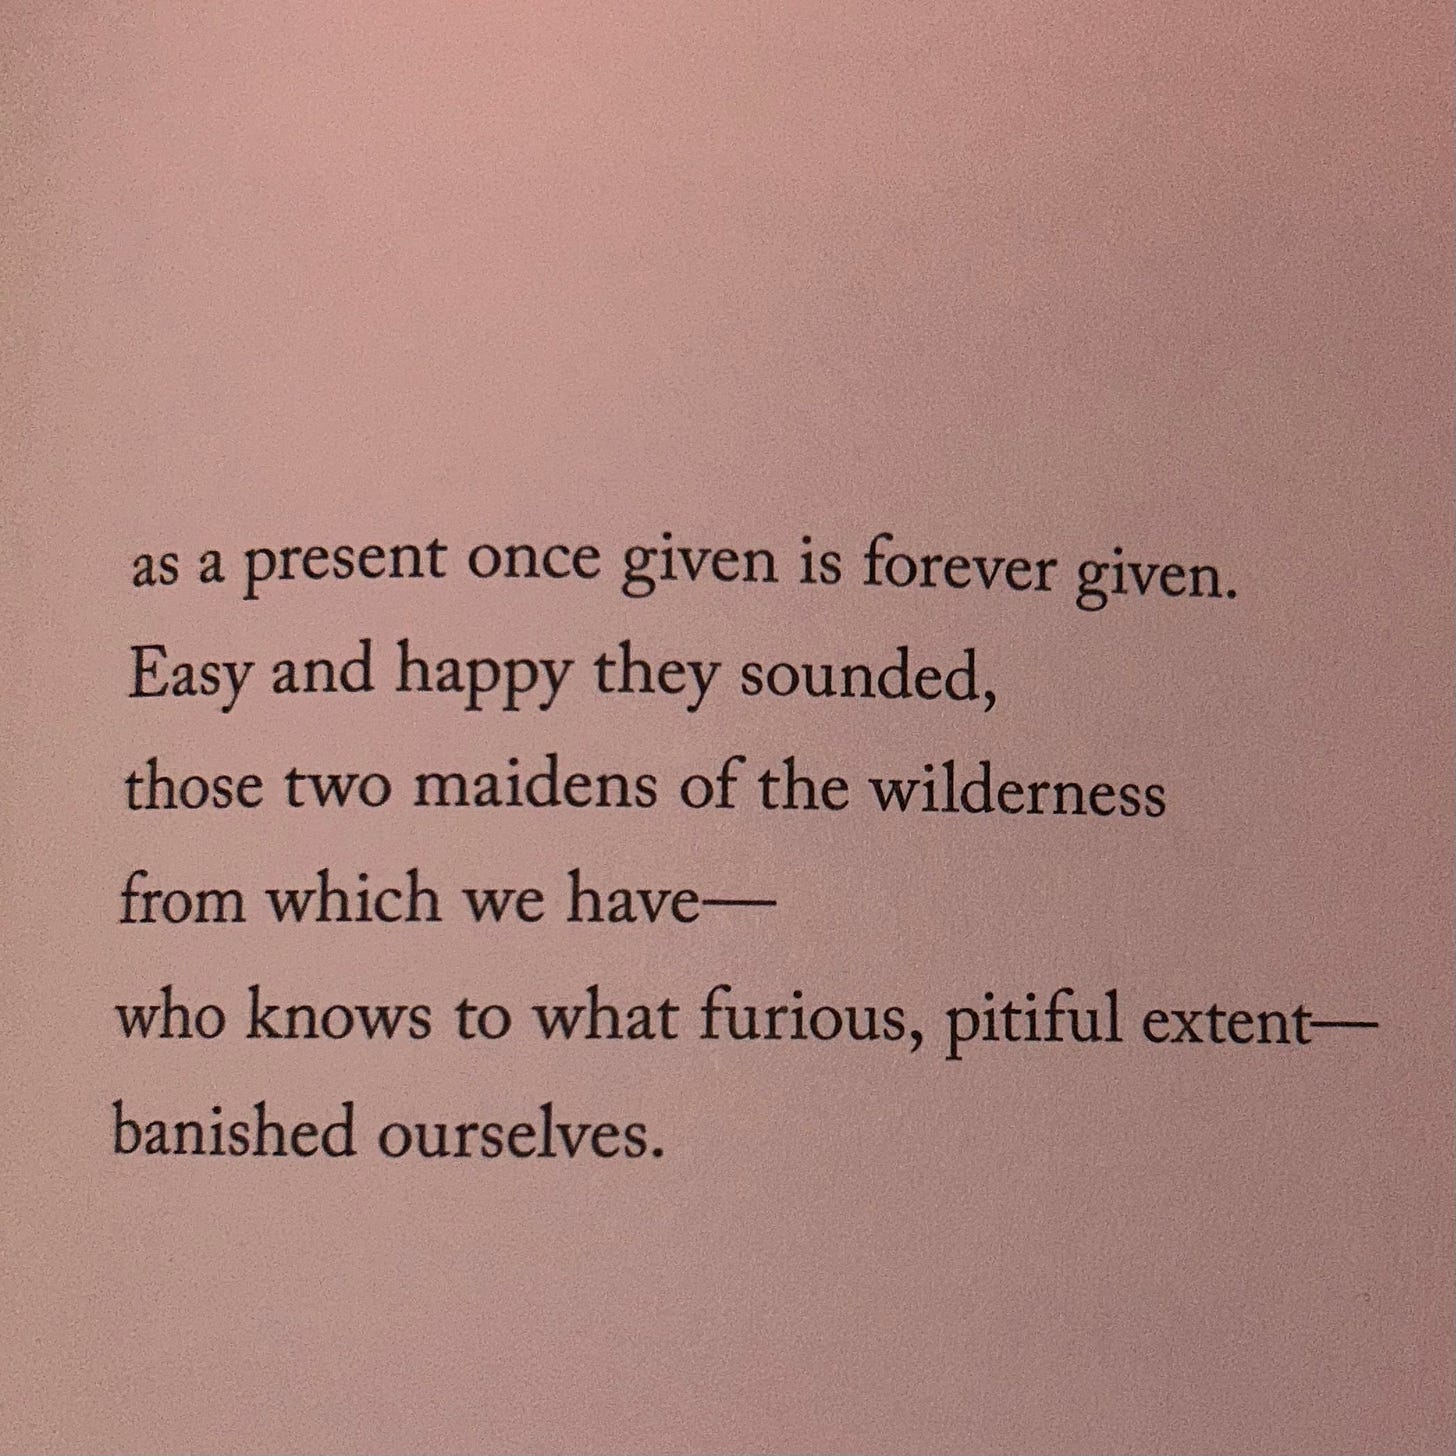 a stanza of poetry in a book which reads: "as a present once given is forever given. Easy and happy they sounded, those two maidens of the wilderness from which we have— who knows to what furious, pitiful extent— banished ourselves."